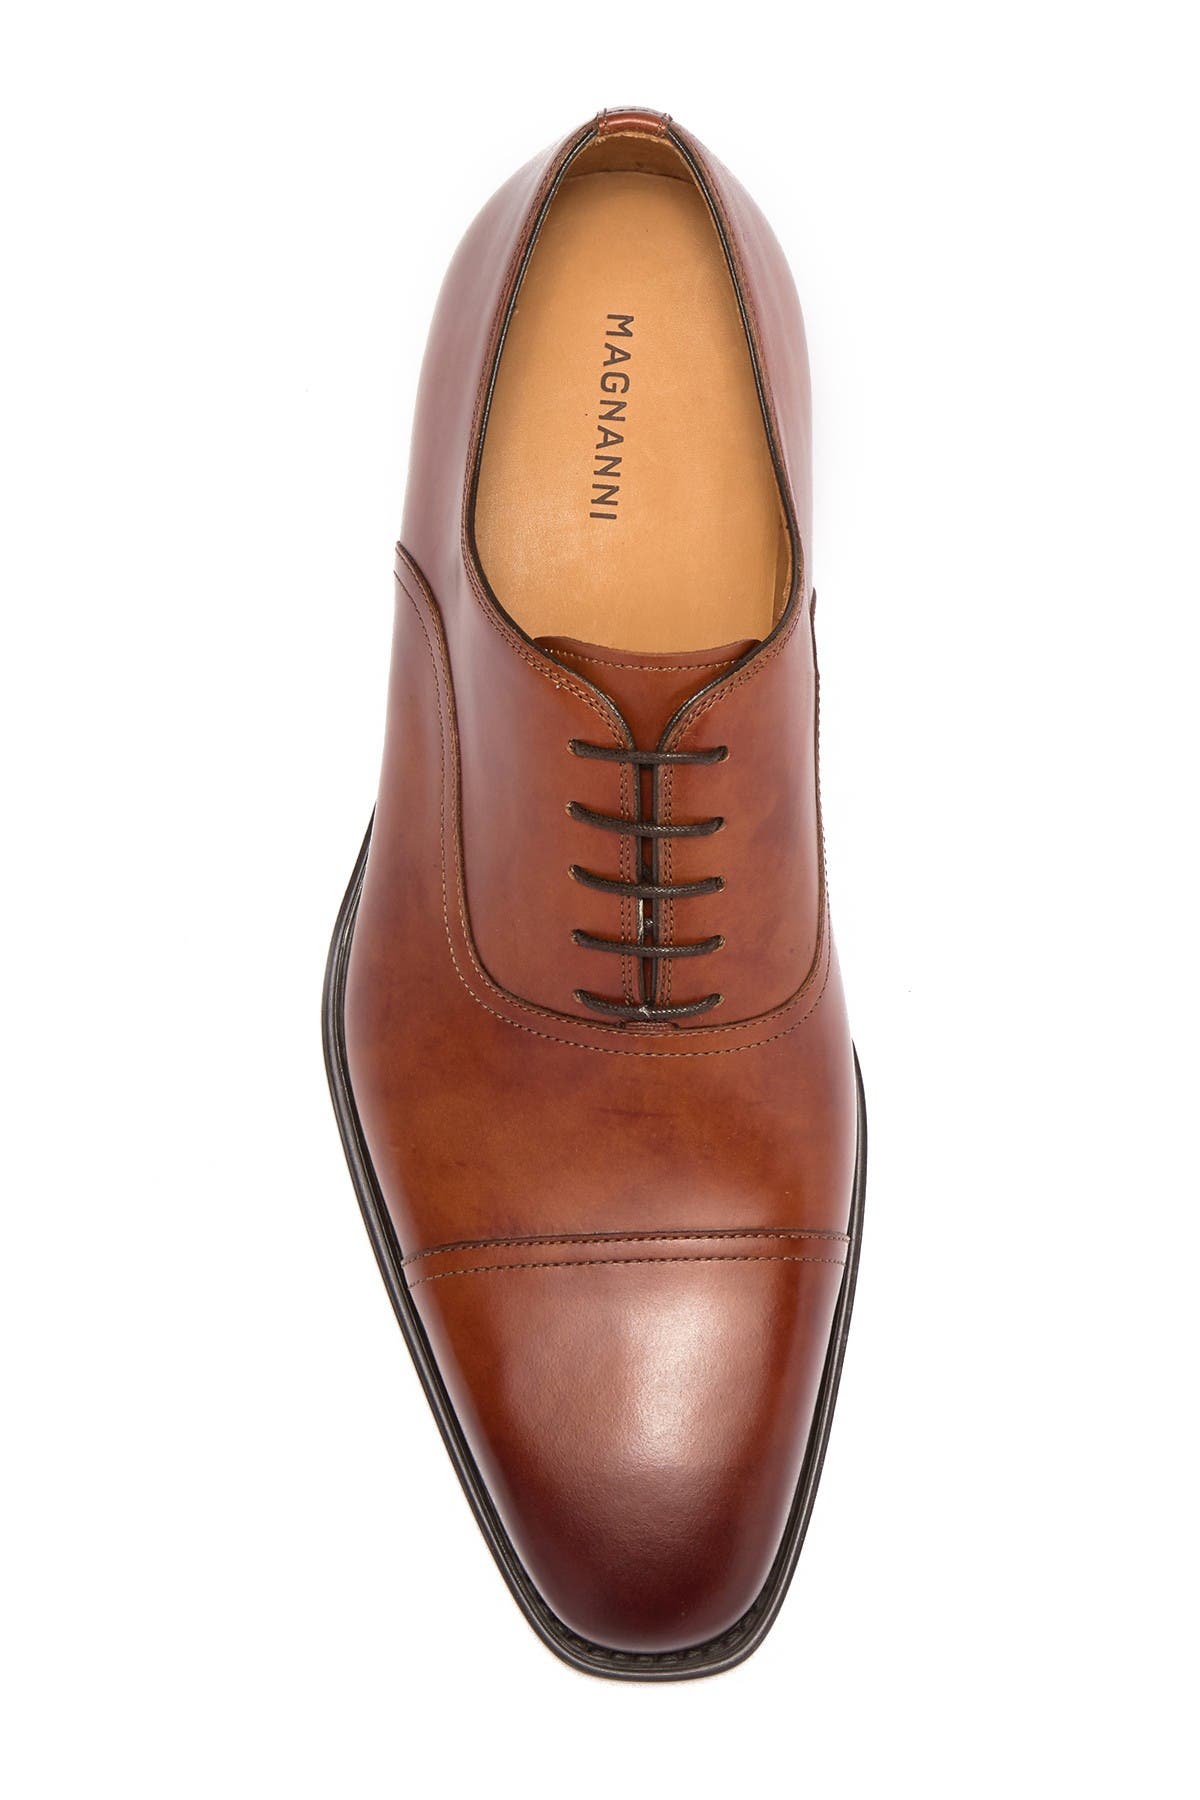 magnanni shoes price